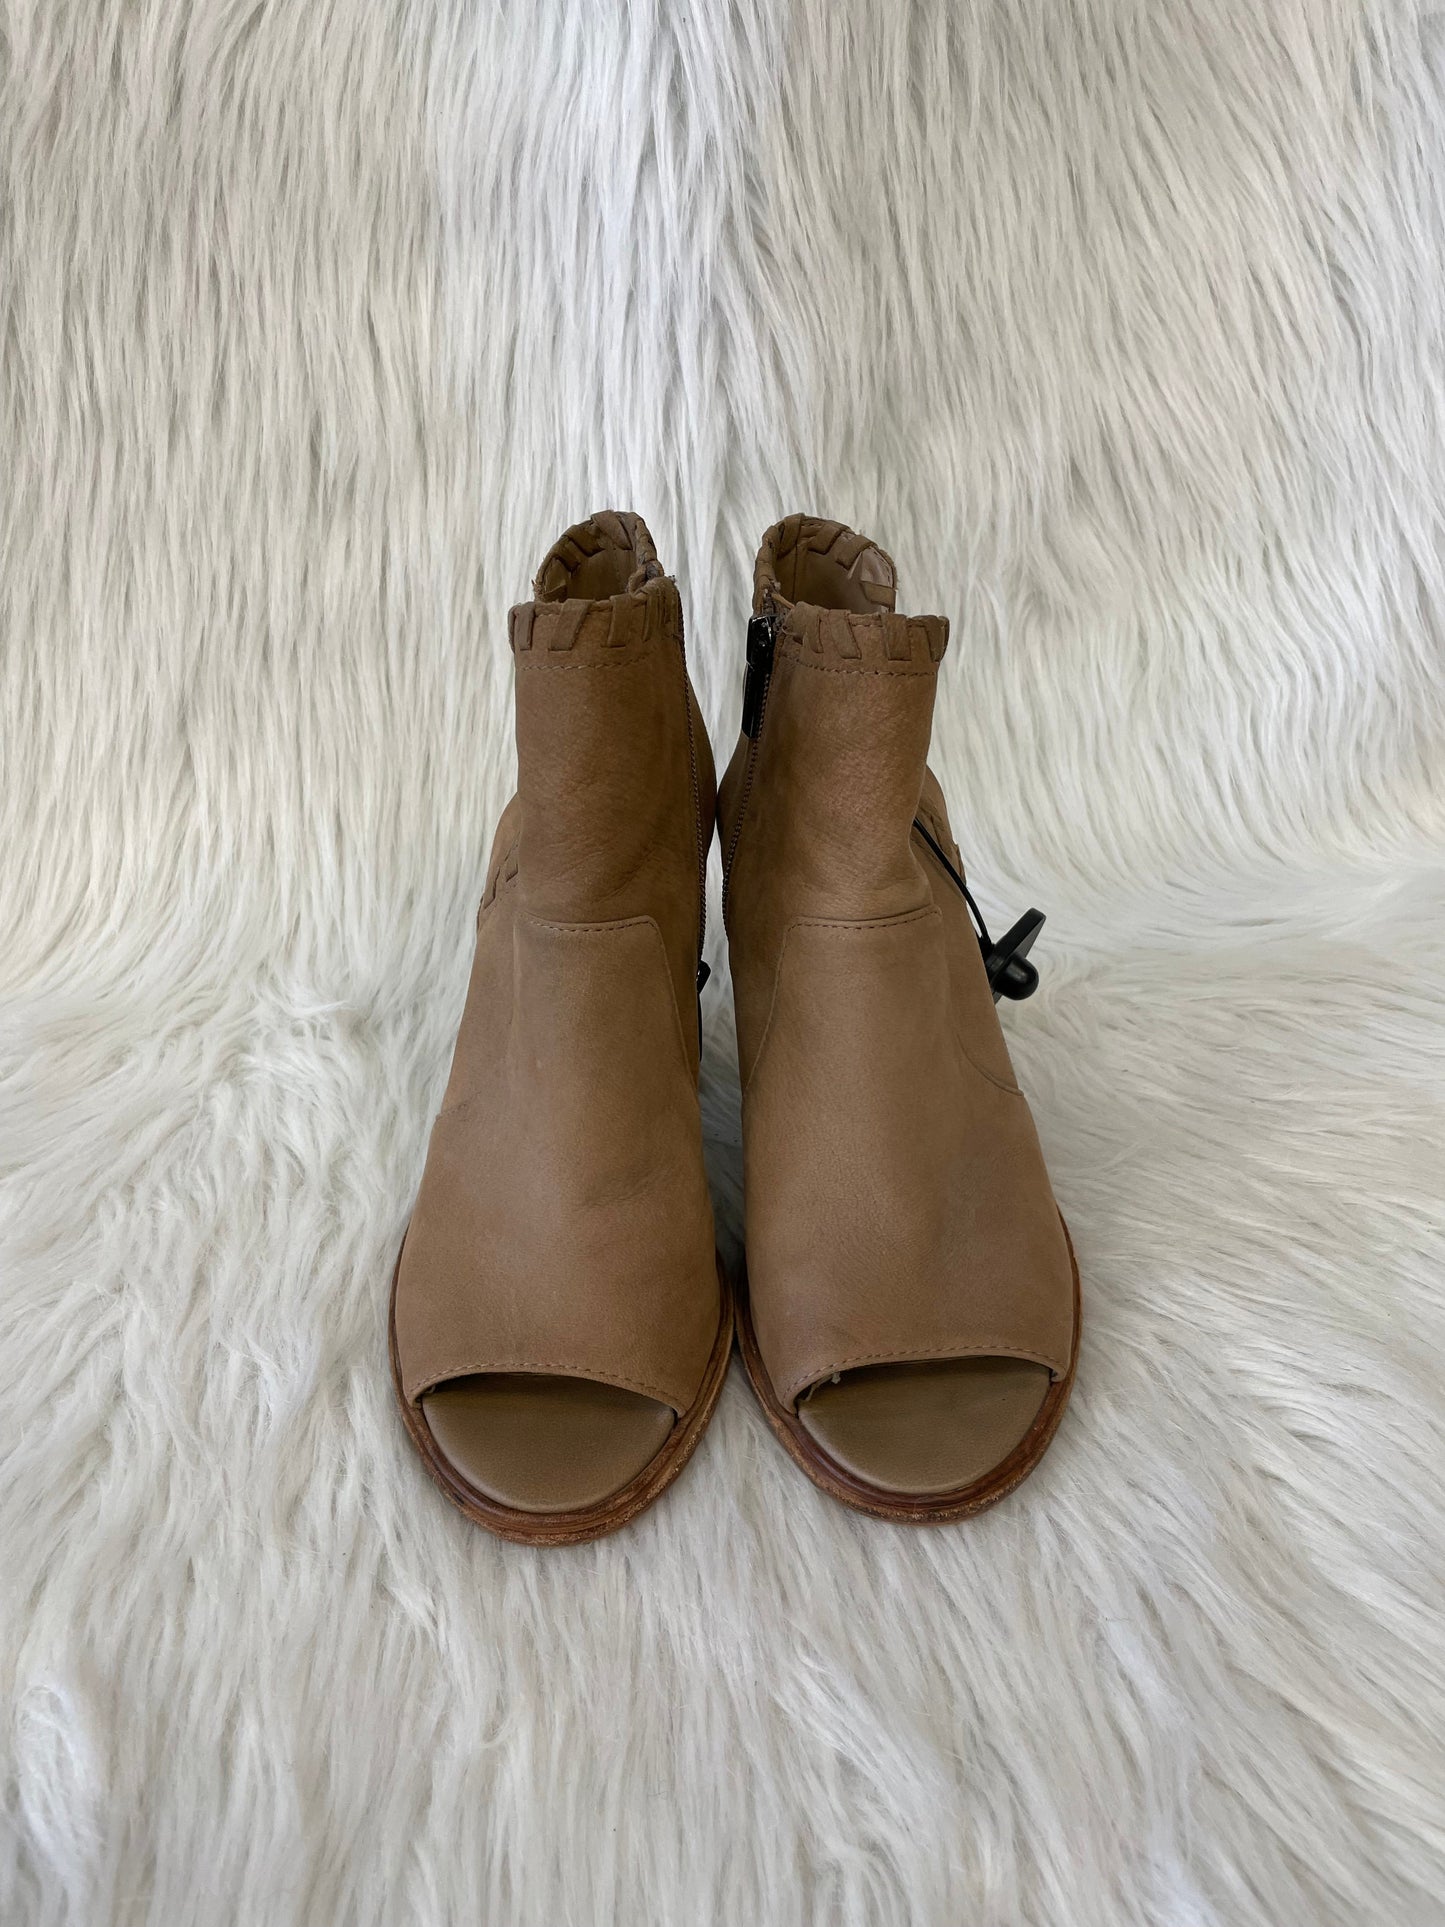 Tan Shoes Heels Block Vince Camuto, Size 6.5